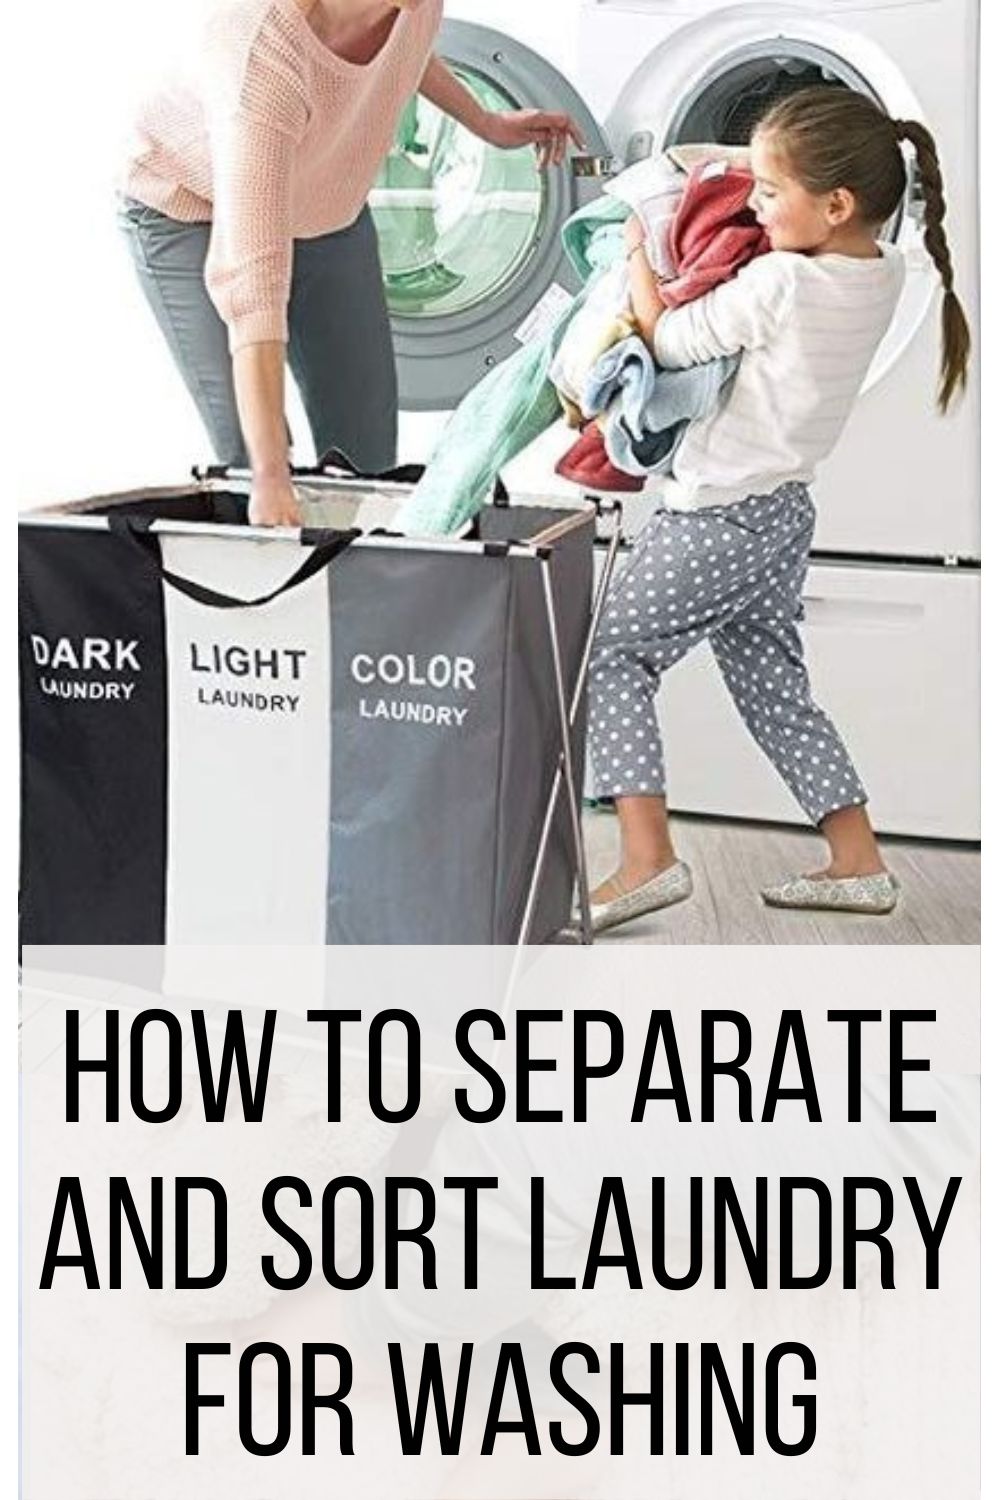 How to Separate and Sort Laundry for Washing